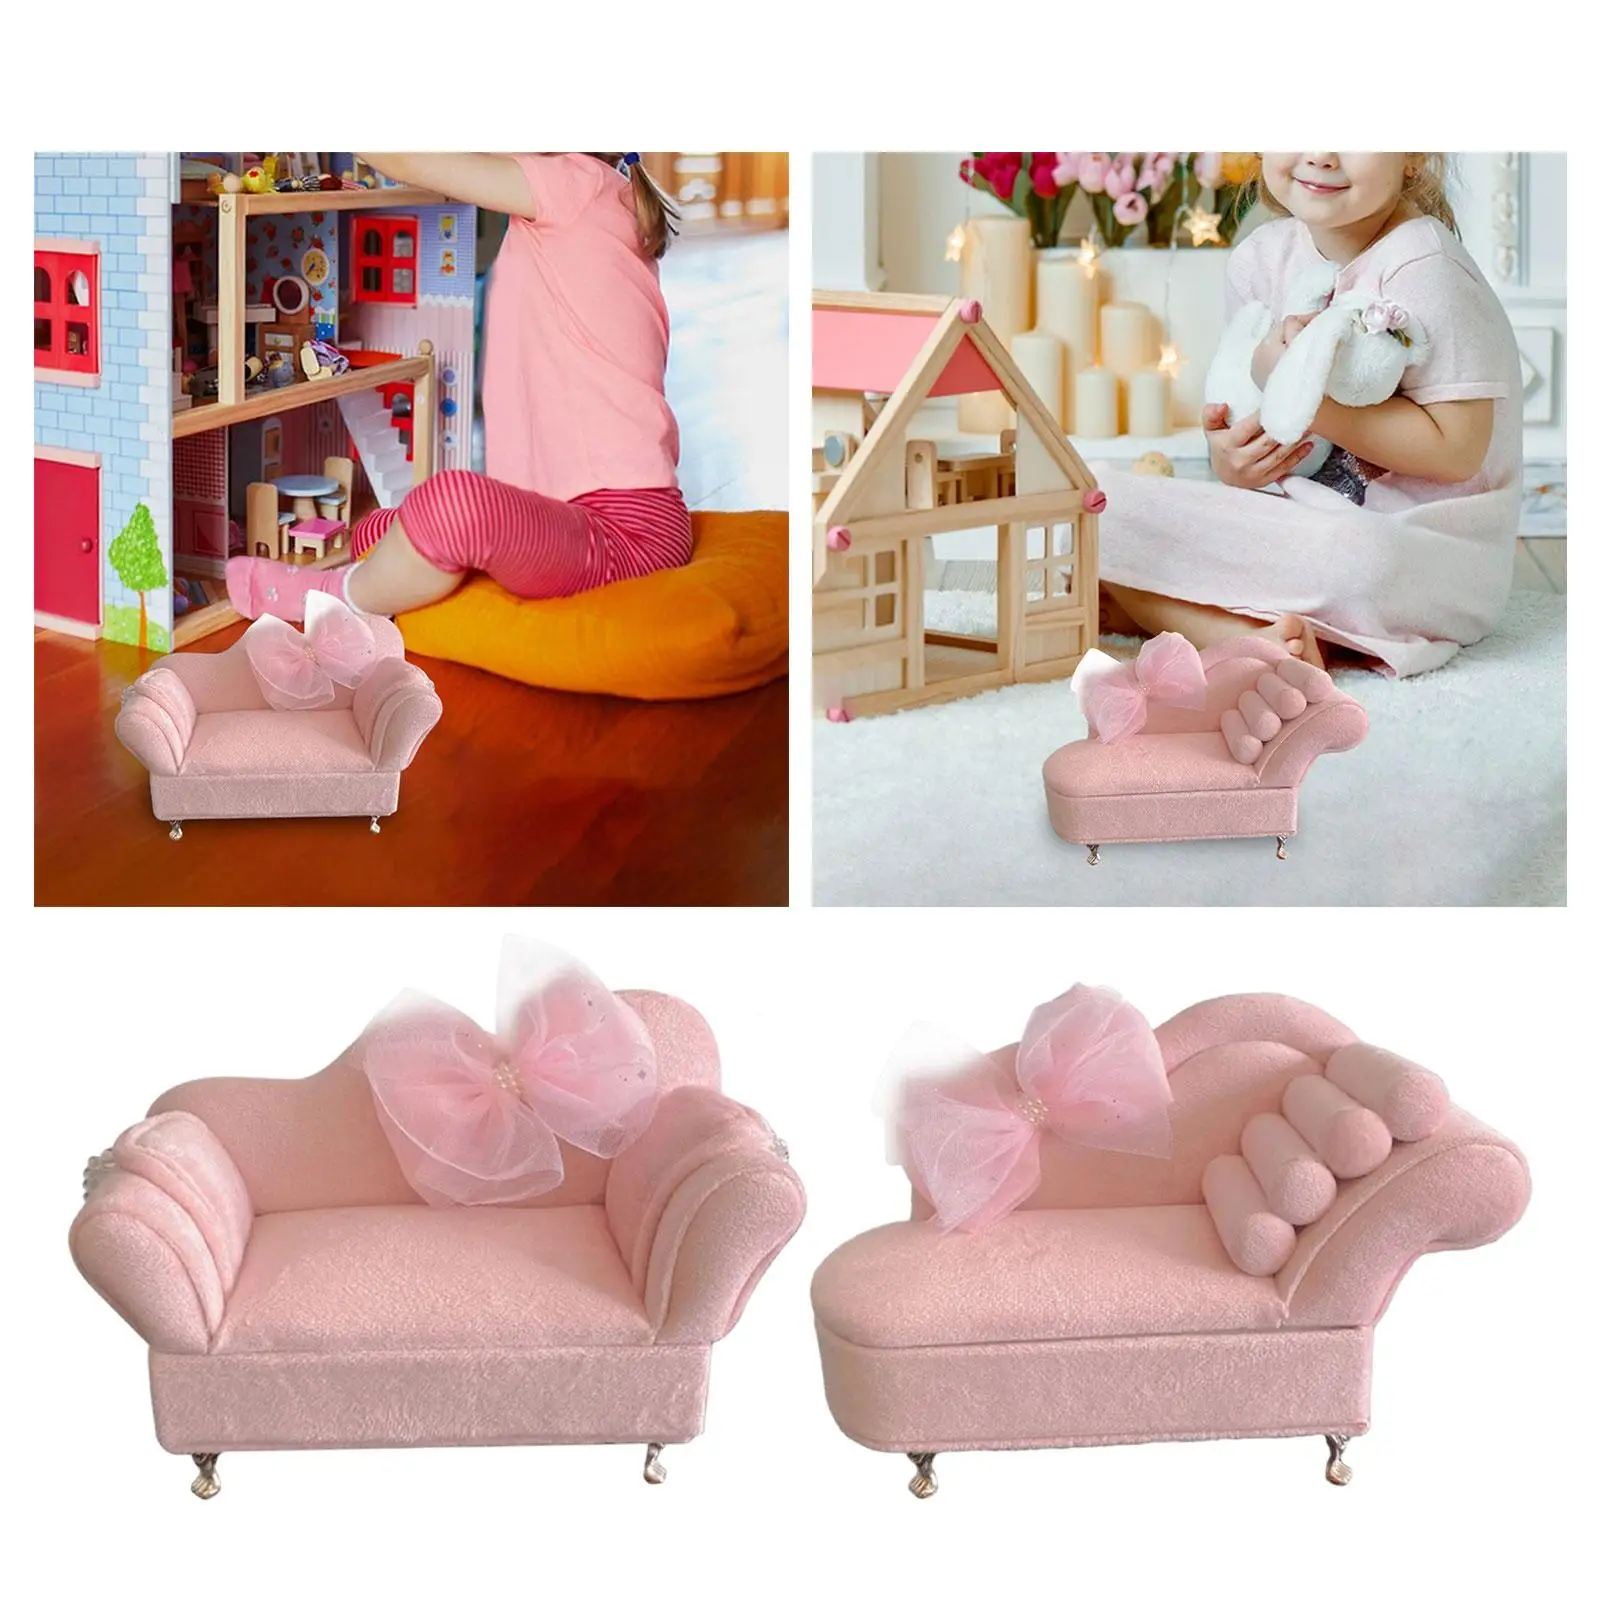 1/12 Sofa,6in Doll Figures Accessory, Bedroom Room Ornaments, Miniature Jewelry Storage Case